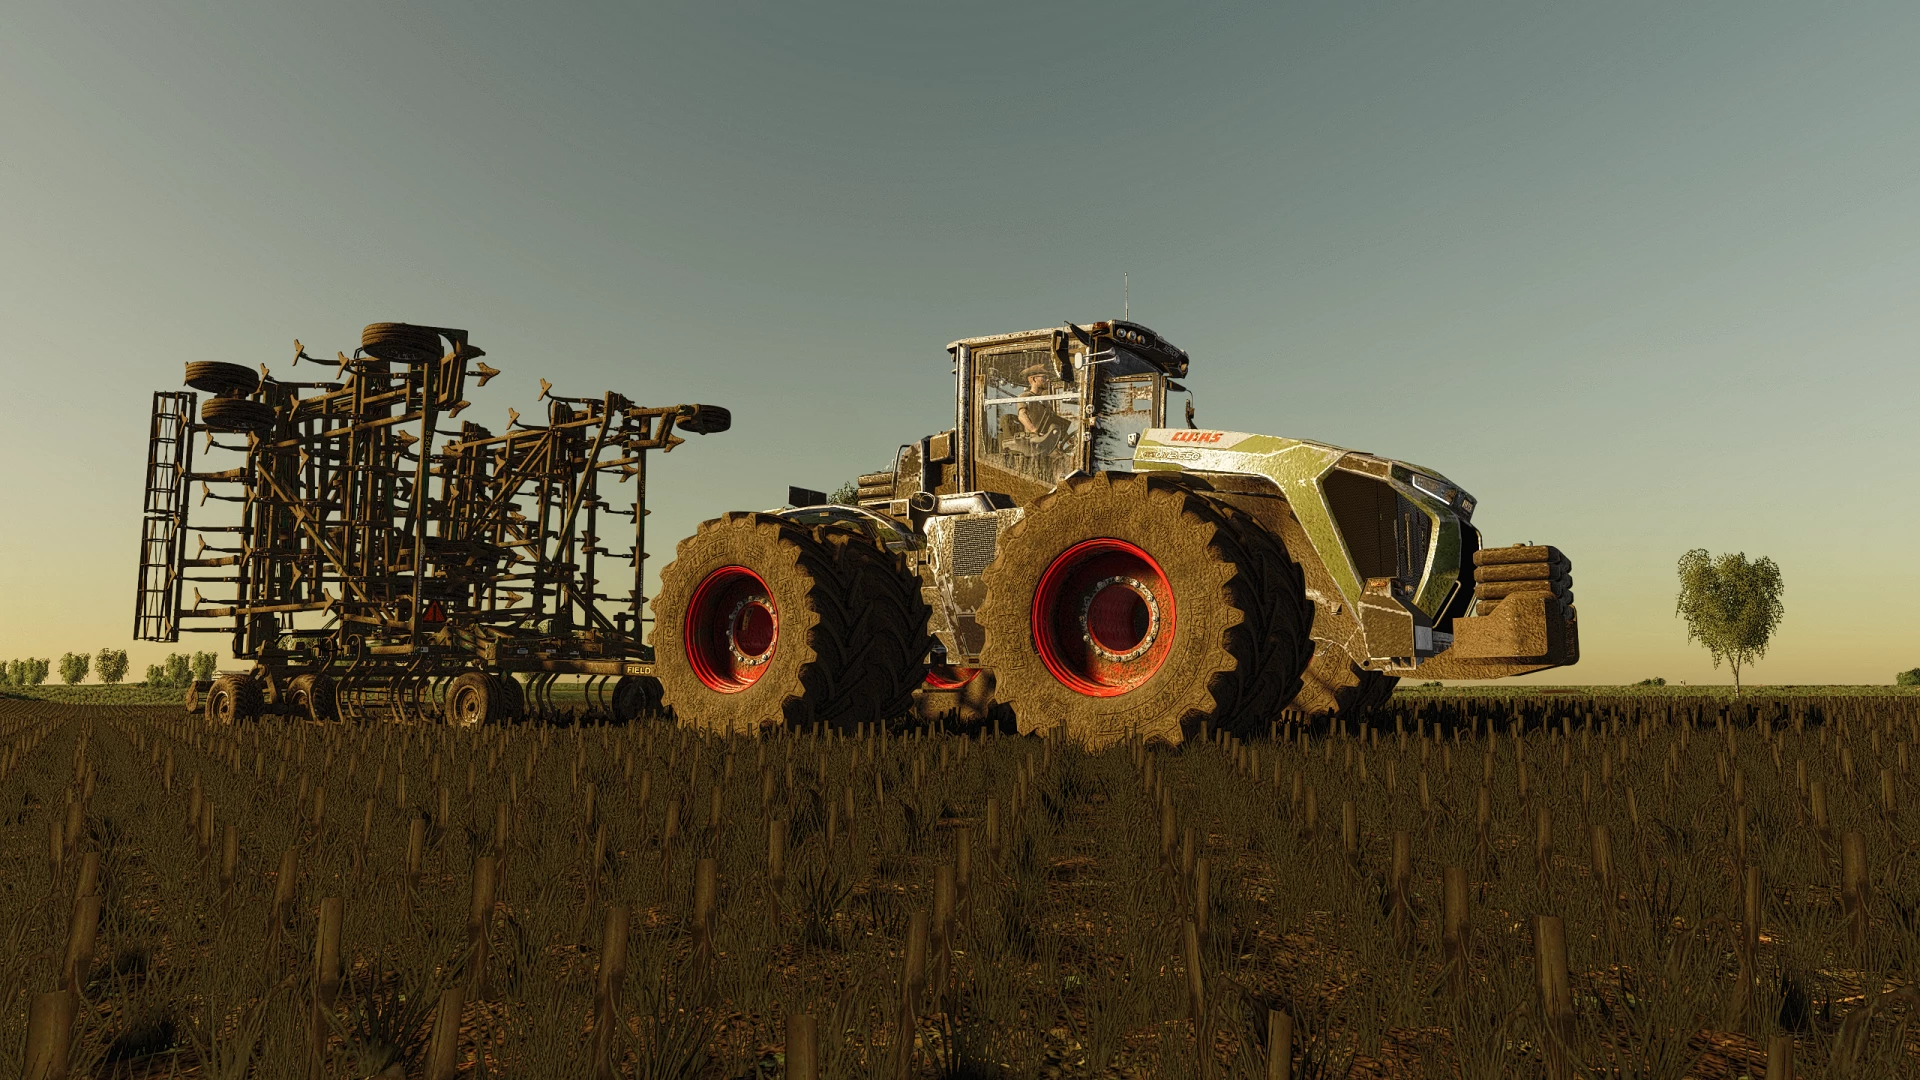 New Xerion,can't wait to SiiD modding's Xerion